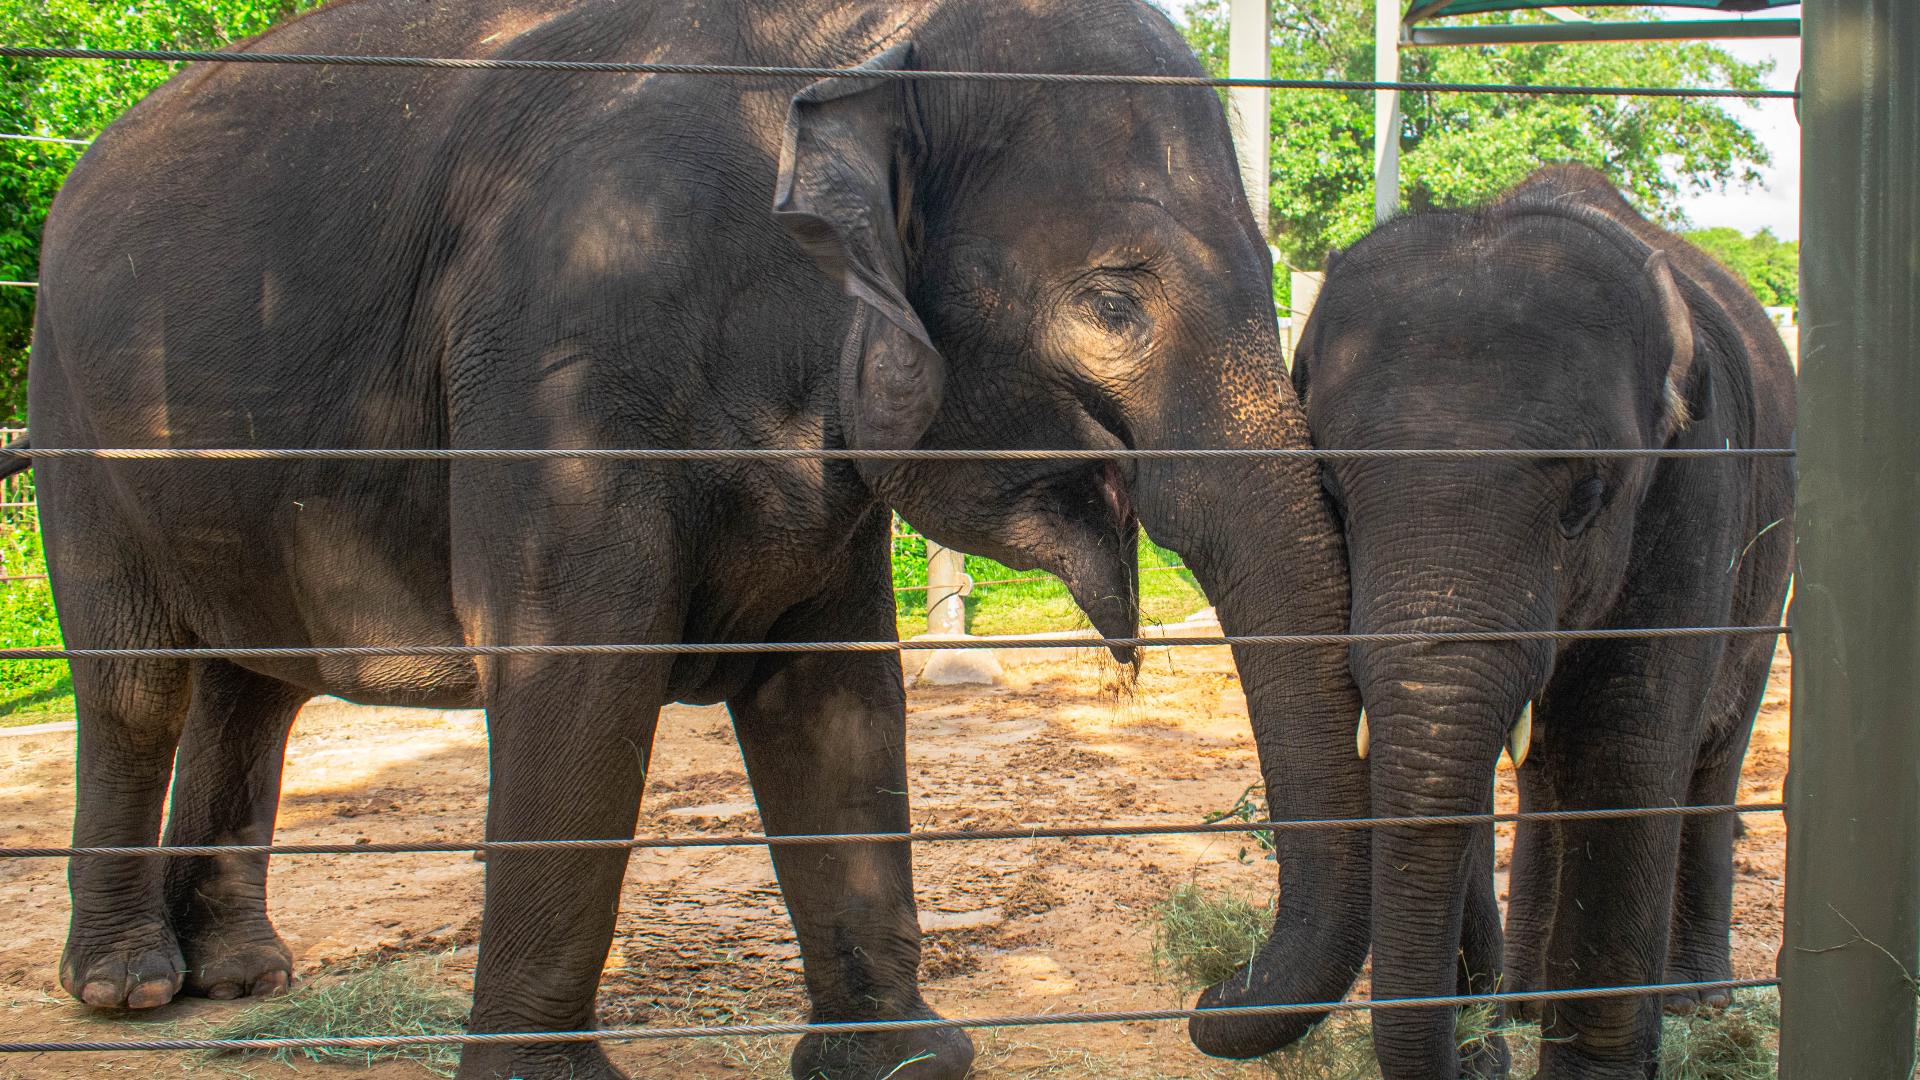 The 33-year-old is expecting a baby elephant at the end of 2024 after a 22-month gestation period. The baby daddy is 58-year-old Thailand.